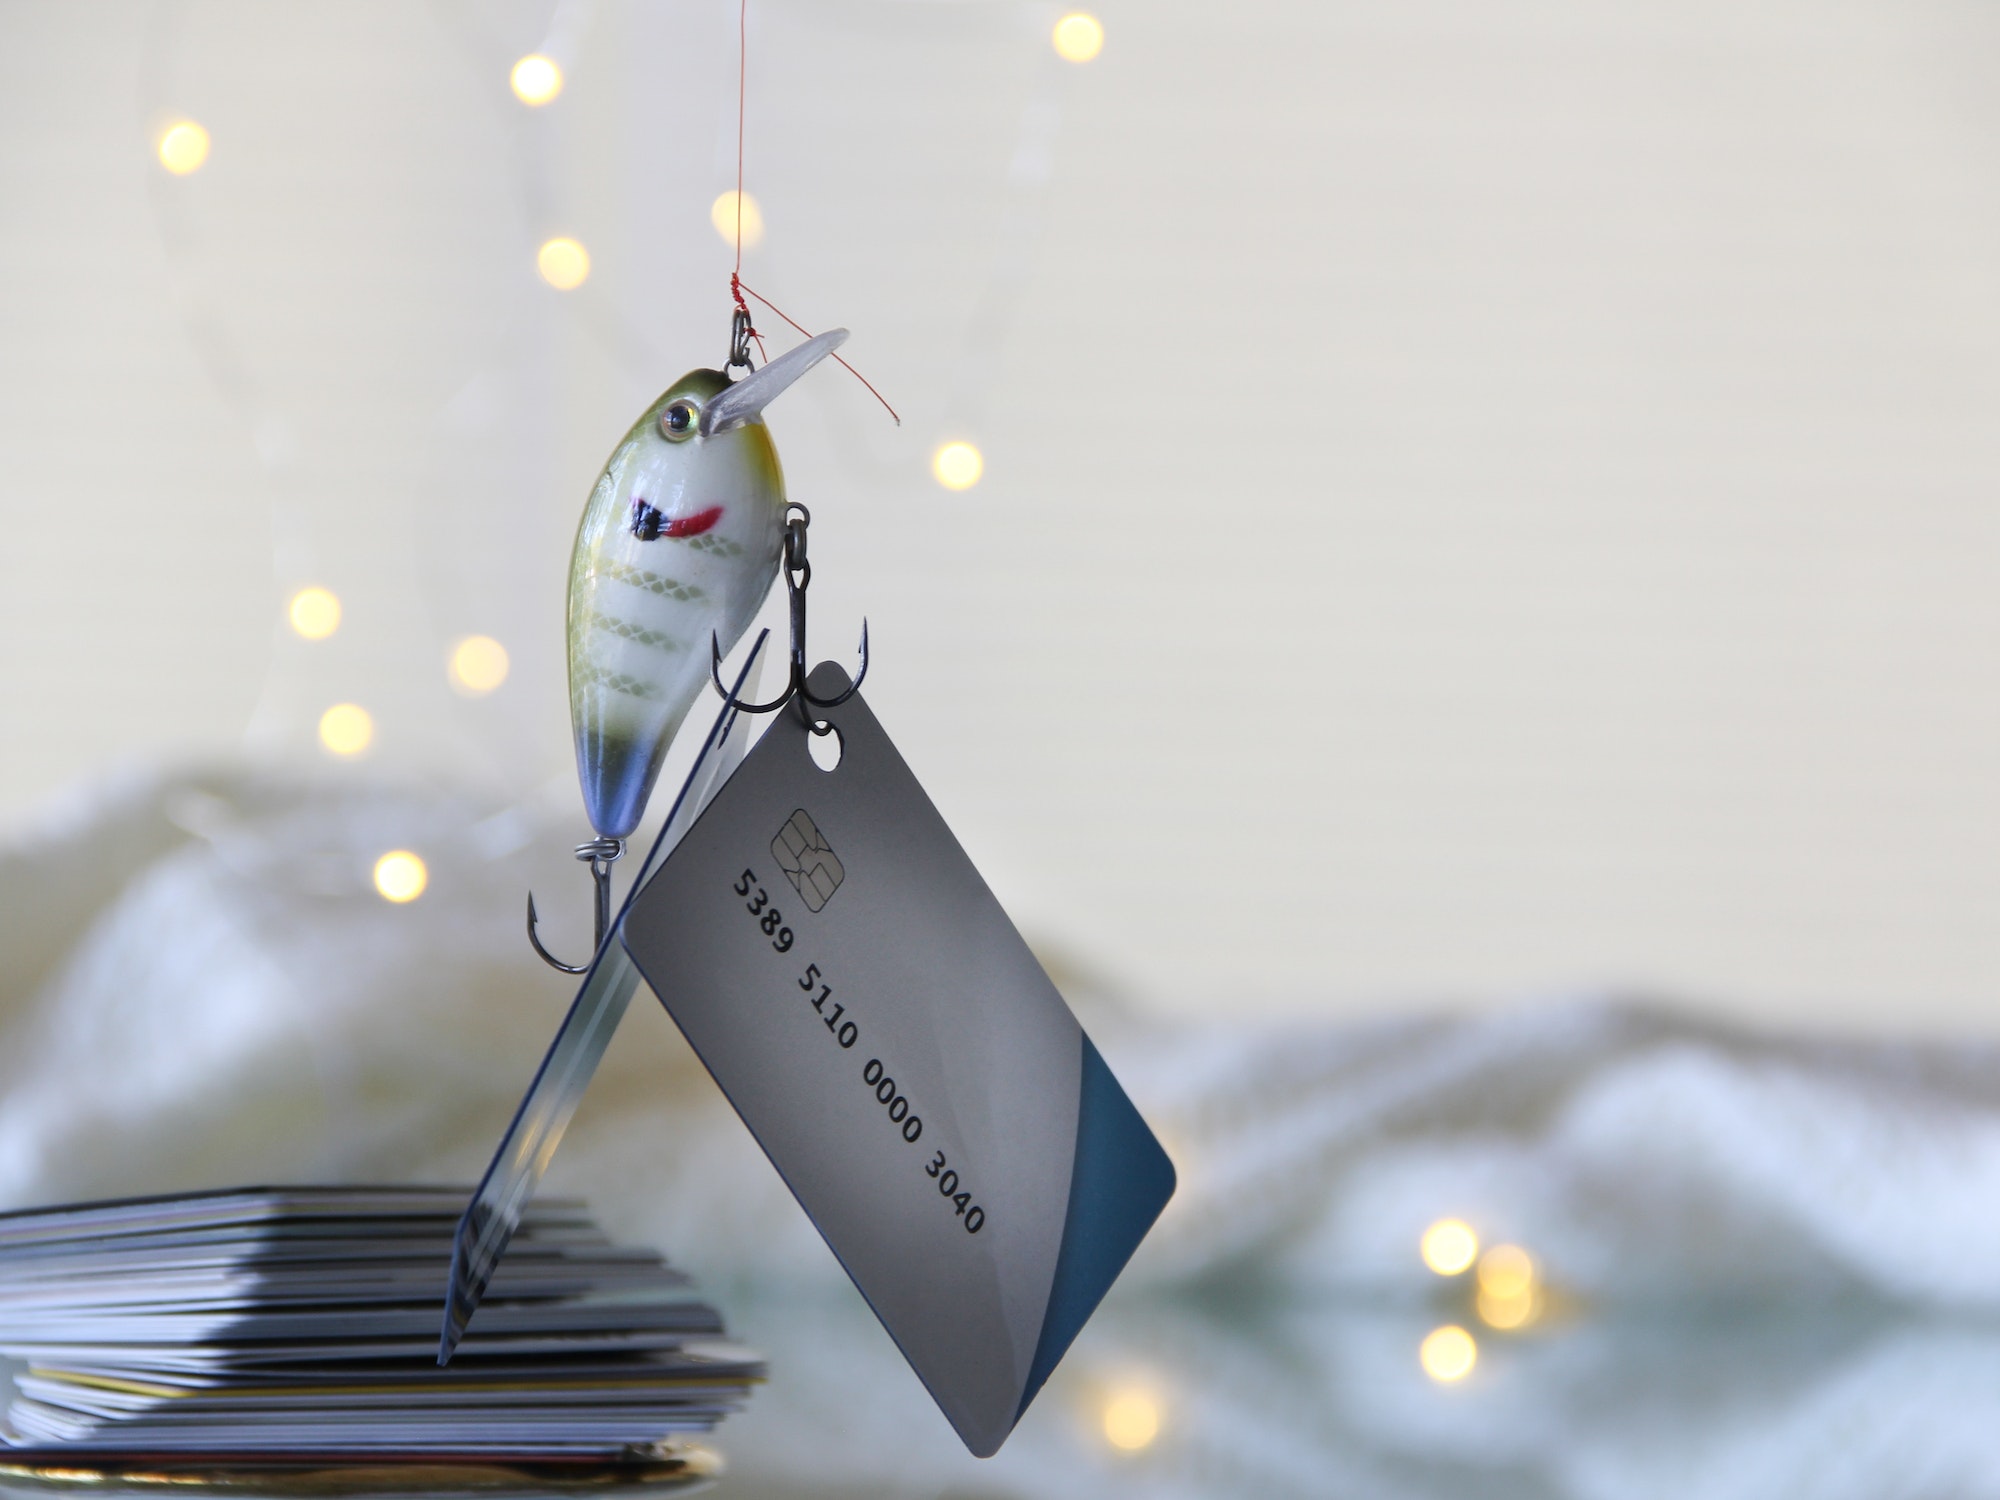 Phishing scam Identity thefts for fraudulent purposes increases during holidays stealing user data